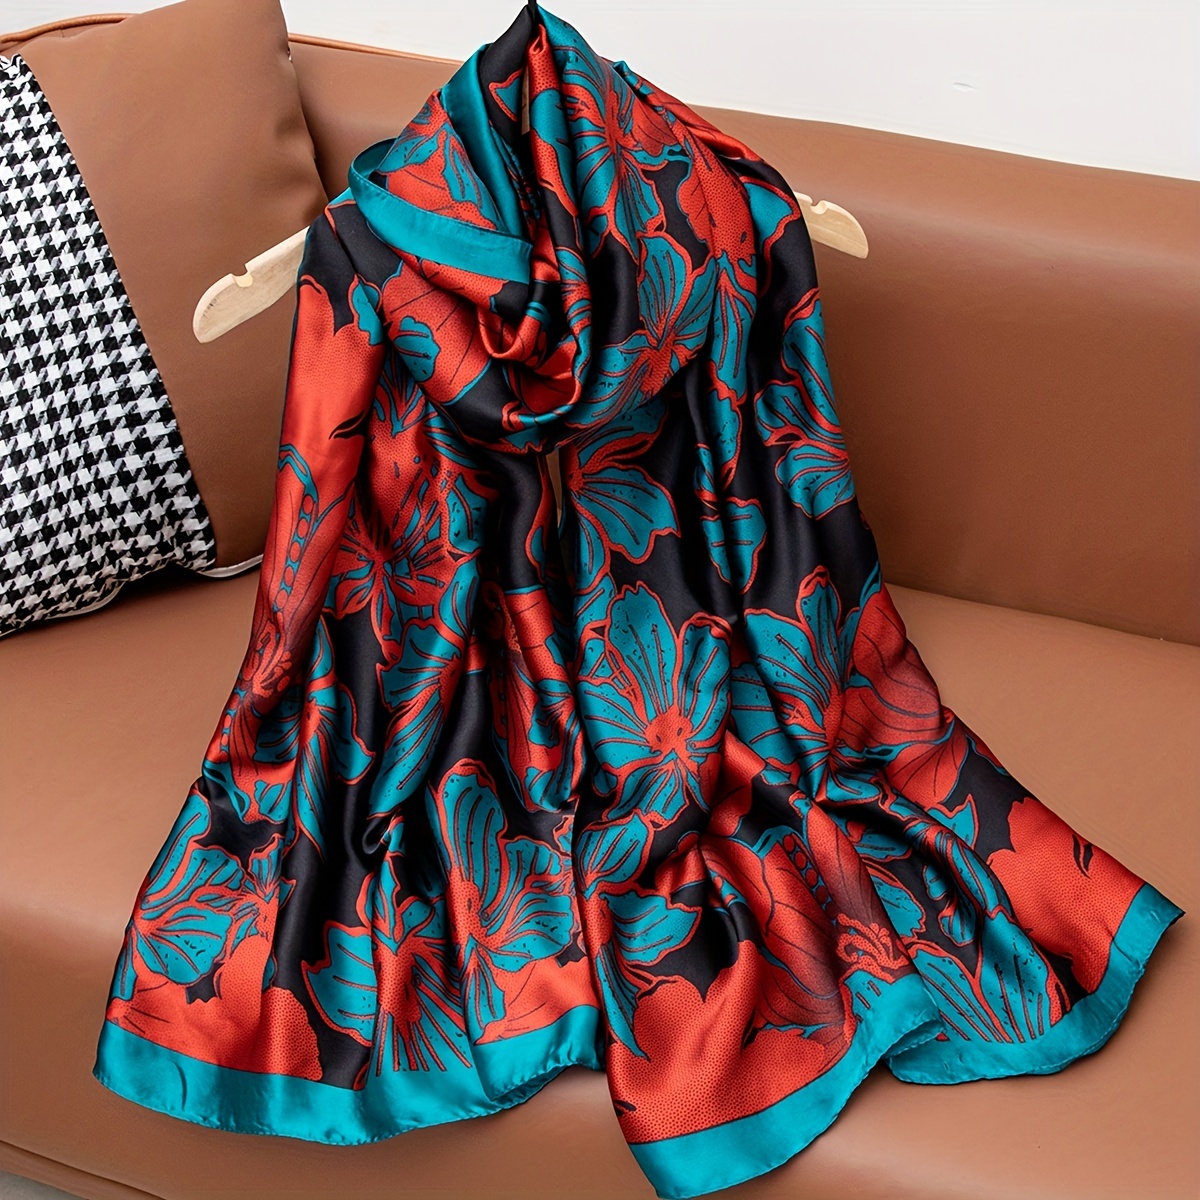 Buy Lily Lower Pattern Scarf Wrap at Our Store - Low Price and Free Shipping!